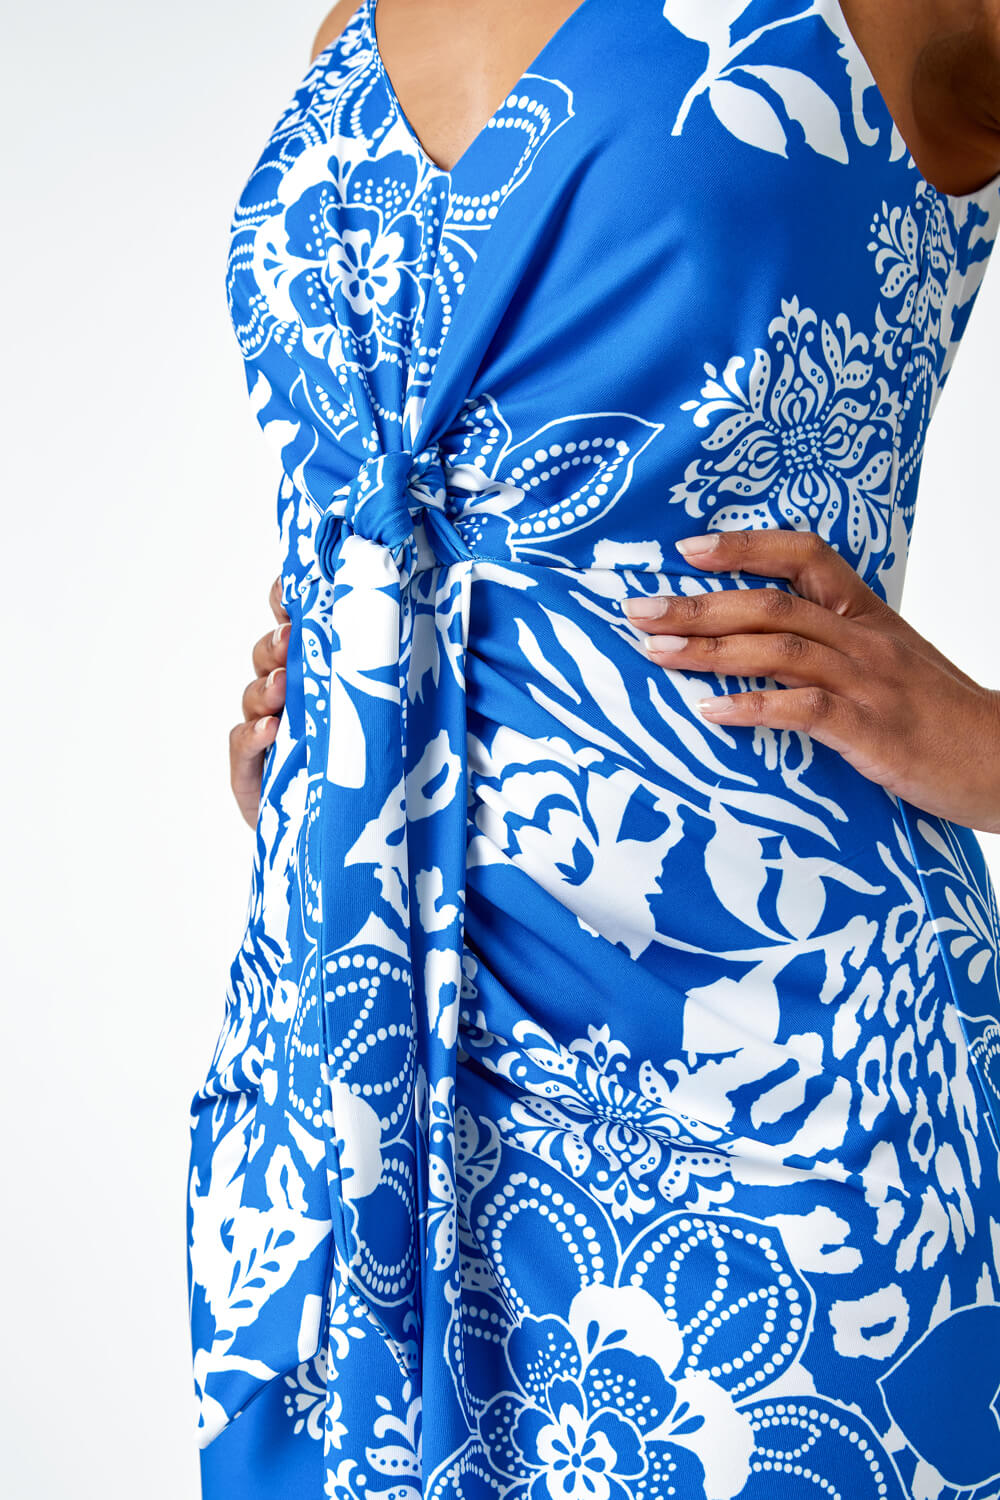 Blue Petite Floral Knot Stretch Maxi Dress, Image 5 of 5